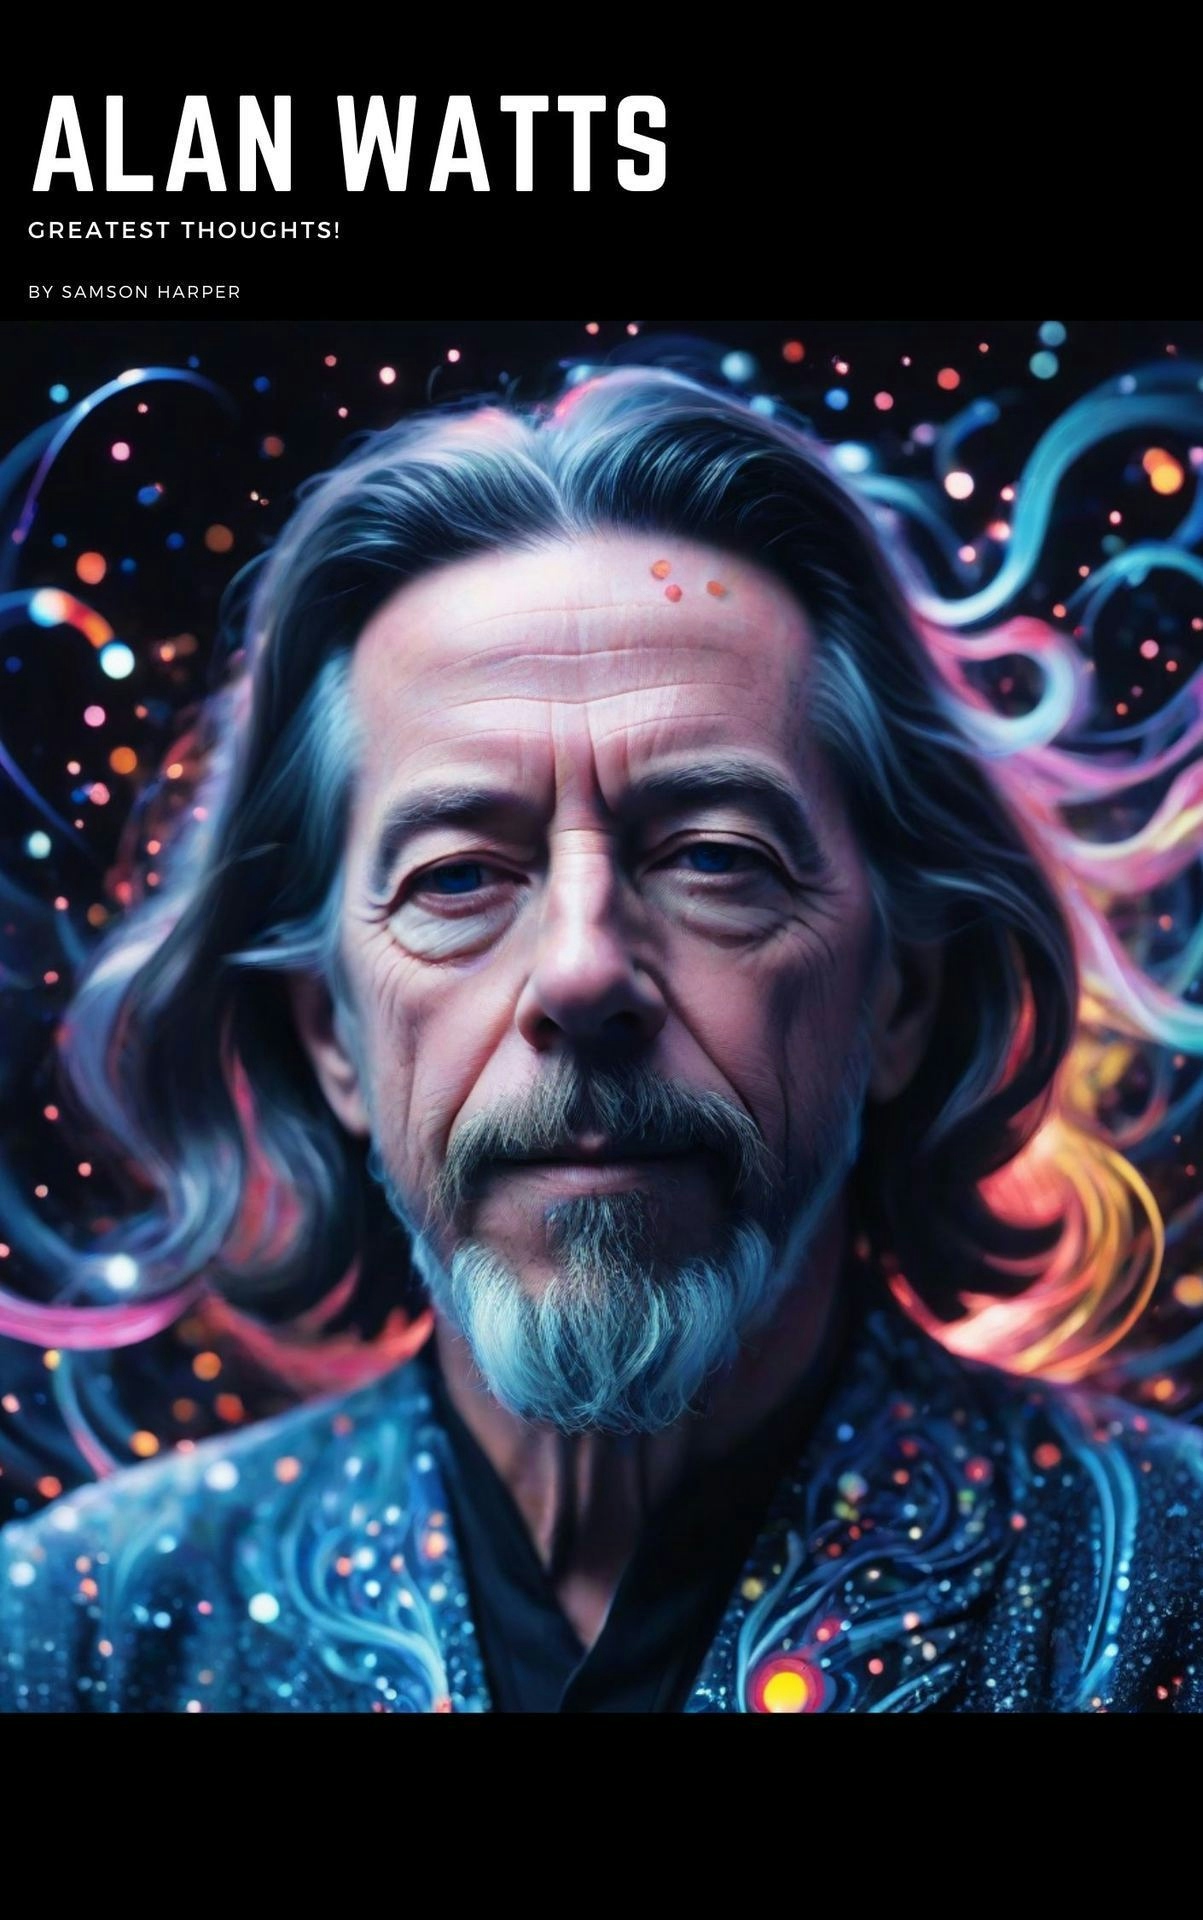 Alan Watts' Greatest Thoughts | A Journey Through Wisdom